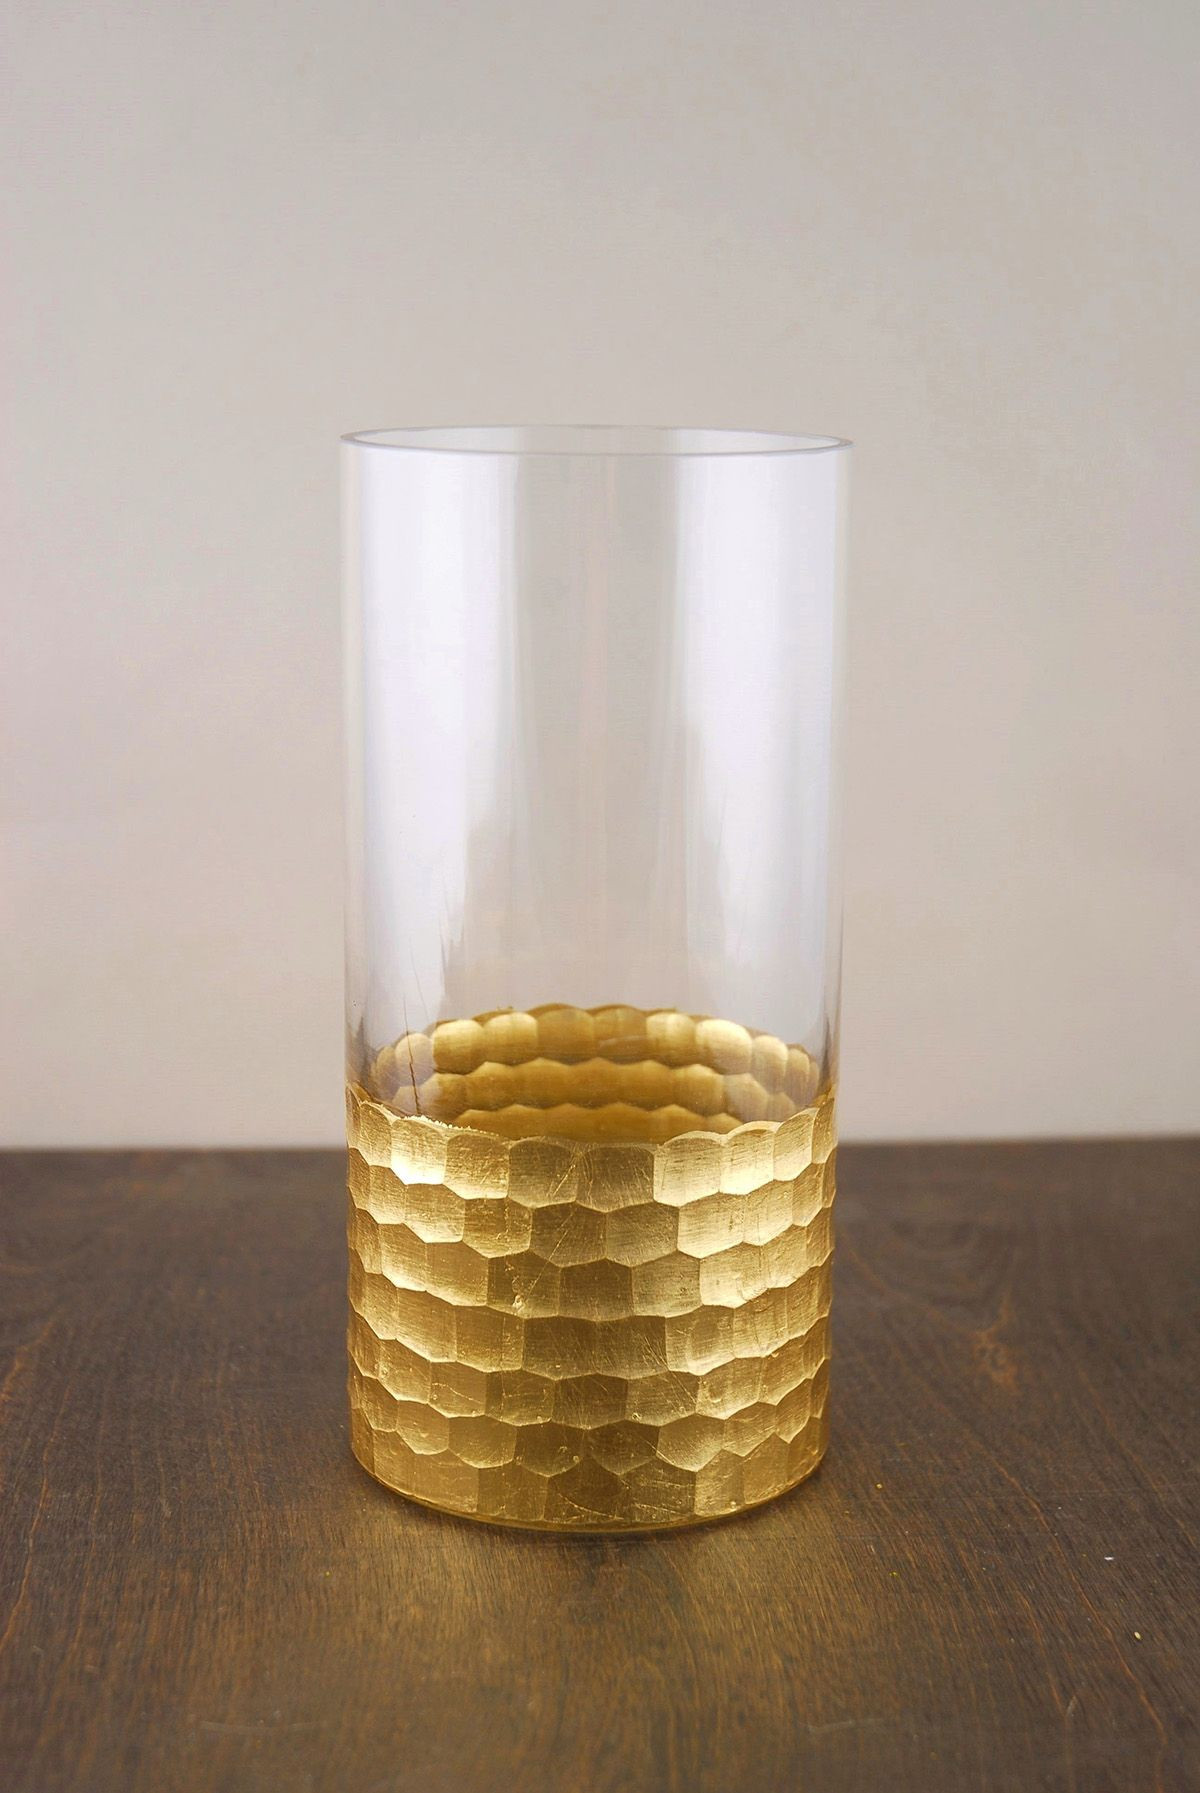 12 Best Rose Colored Glass Vase 2024 free download rose colored glass vase of gold cylinder vases image vases disposable plastic single cheap intended for gold cylinder vases images gold honey b cylinder vase 8 x 4 of gold